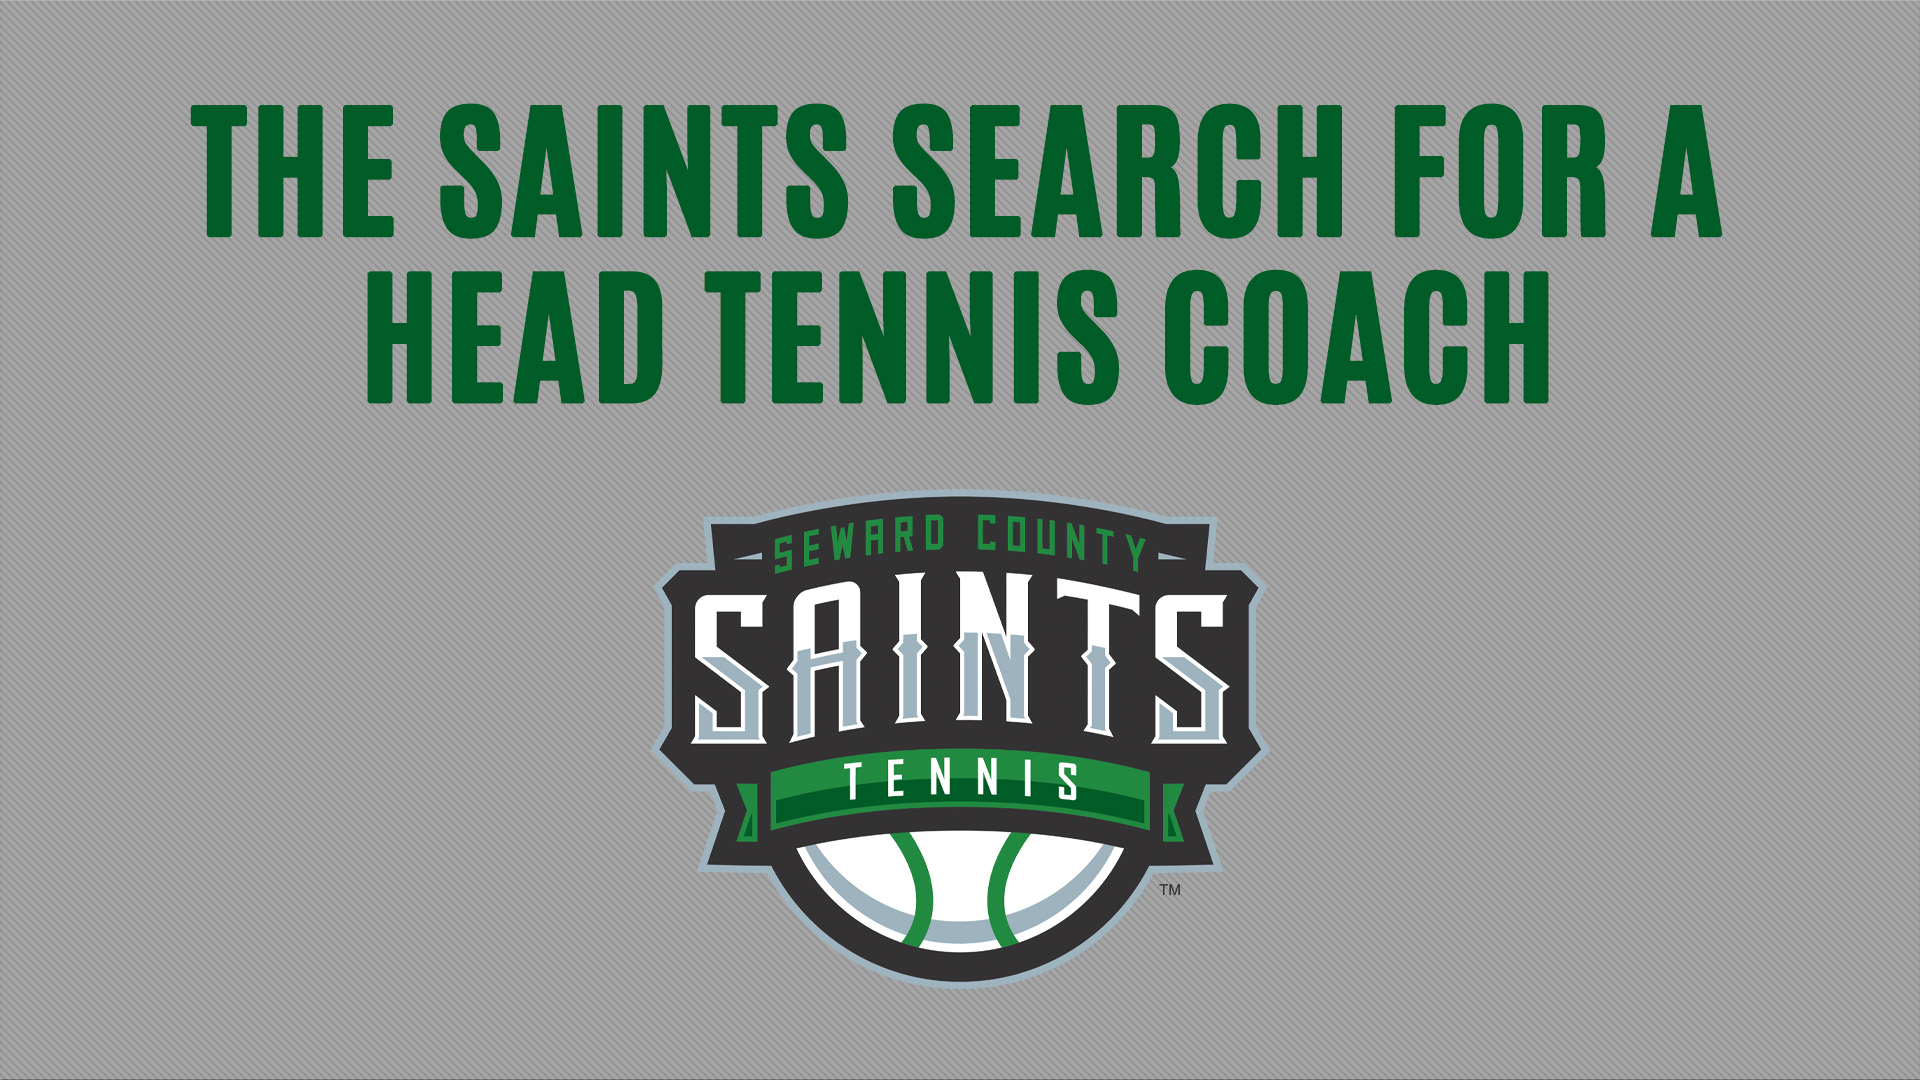 The Saints search for a new Head Tennis Coach